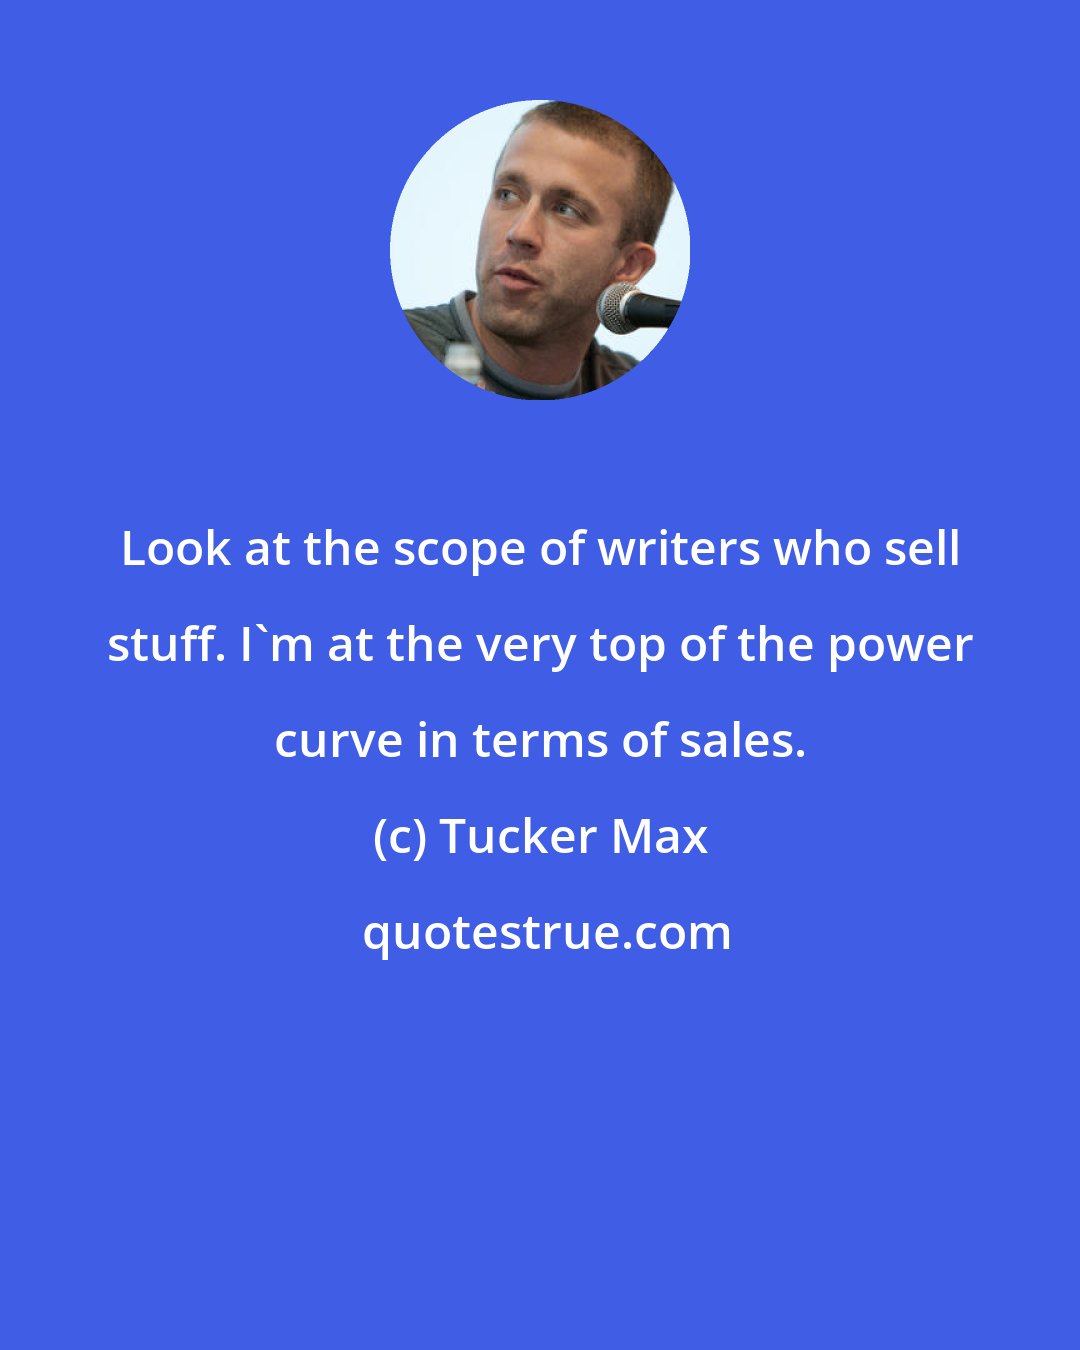 Tucker Max: Look at the scope of writers who sell stuff. I'm at the very top of the power curve in terms of sales.